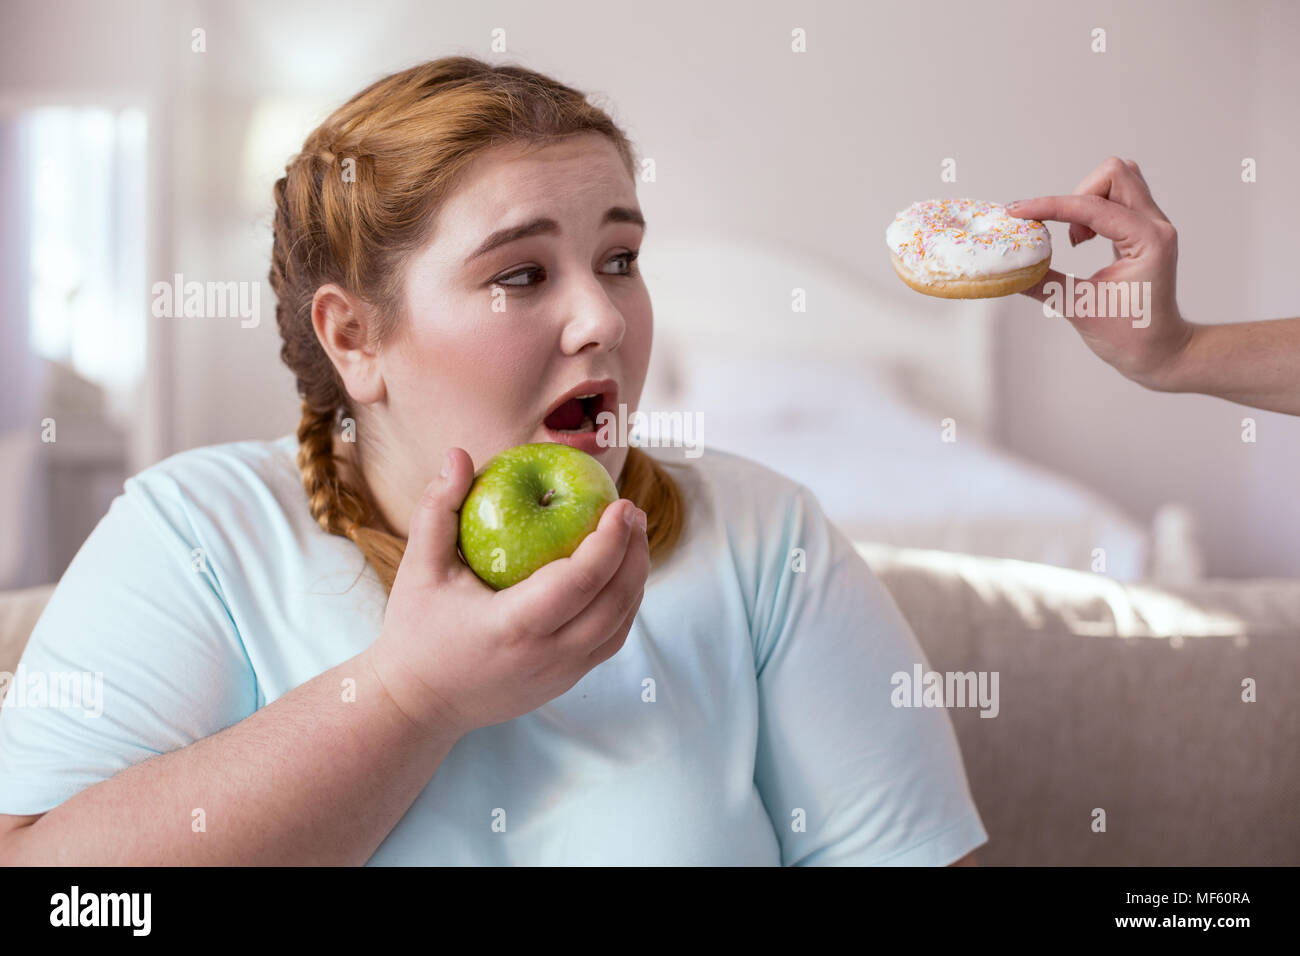 Chubby young woman holding green apple Stock Photo